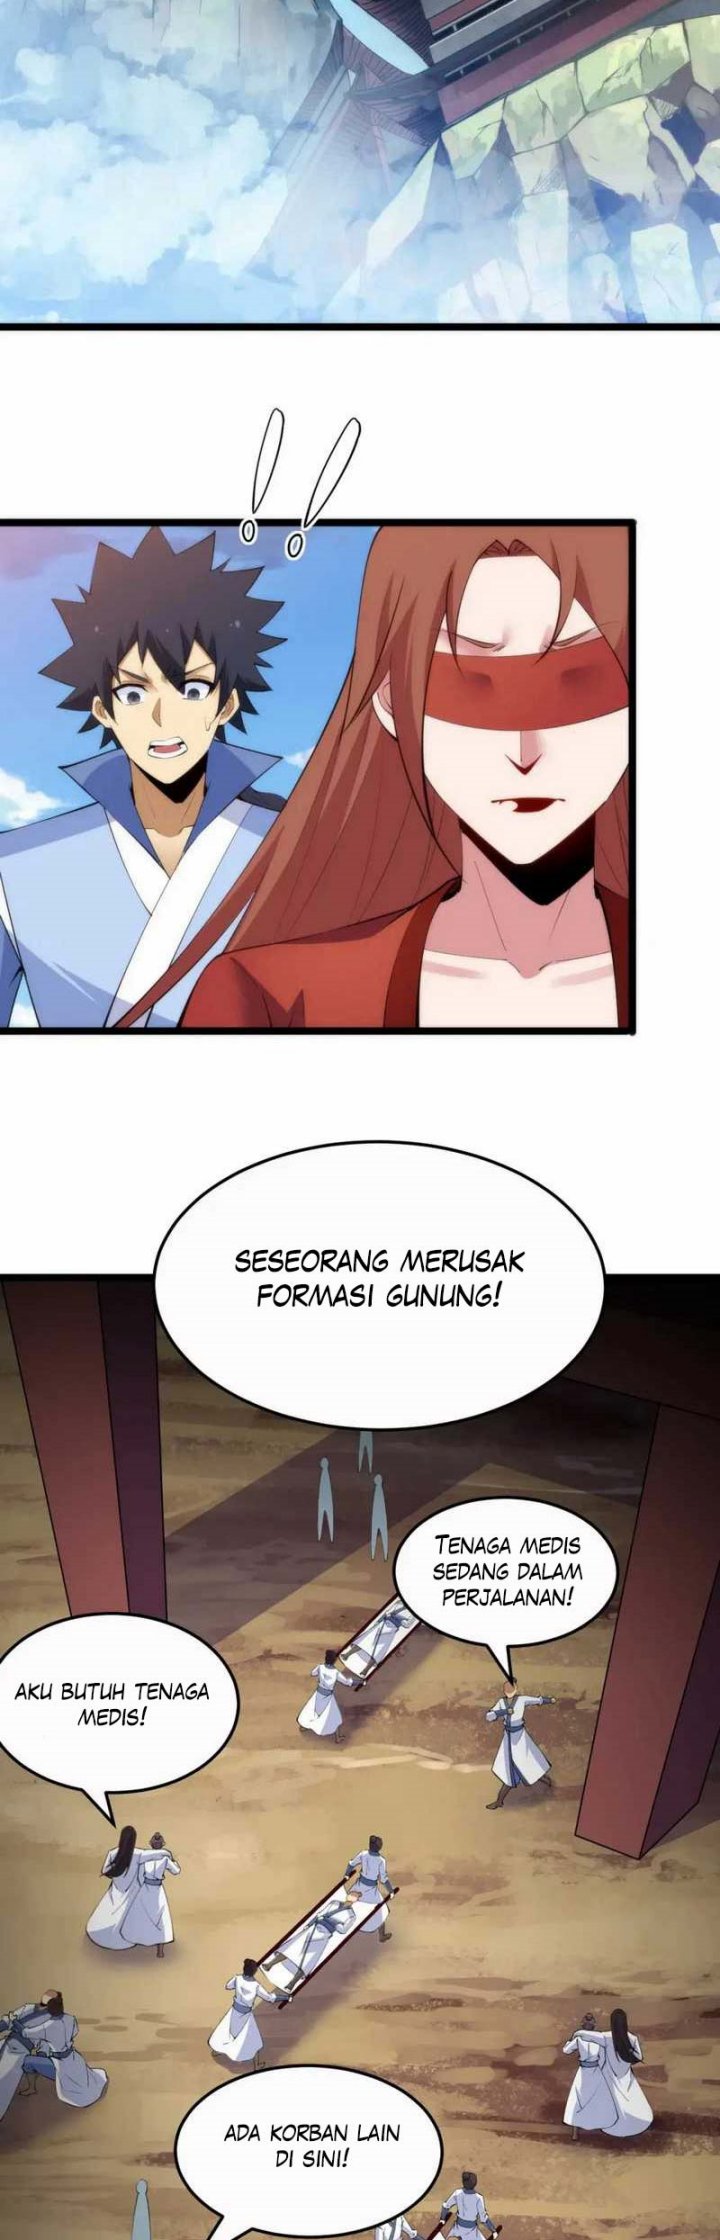 Dilarang COPAS - situs resmi www.mangacanblog.com - Komik i just want to be beaten to death by everyone 179 - chapter 179 180 Indonesia i just want to be beaten to death by everyone 179 - chapter 179 Terbaru 16|Baca Manga Komik Indonesia|Mangacan